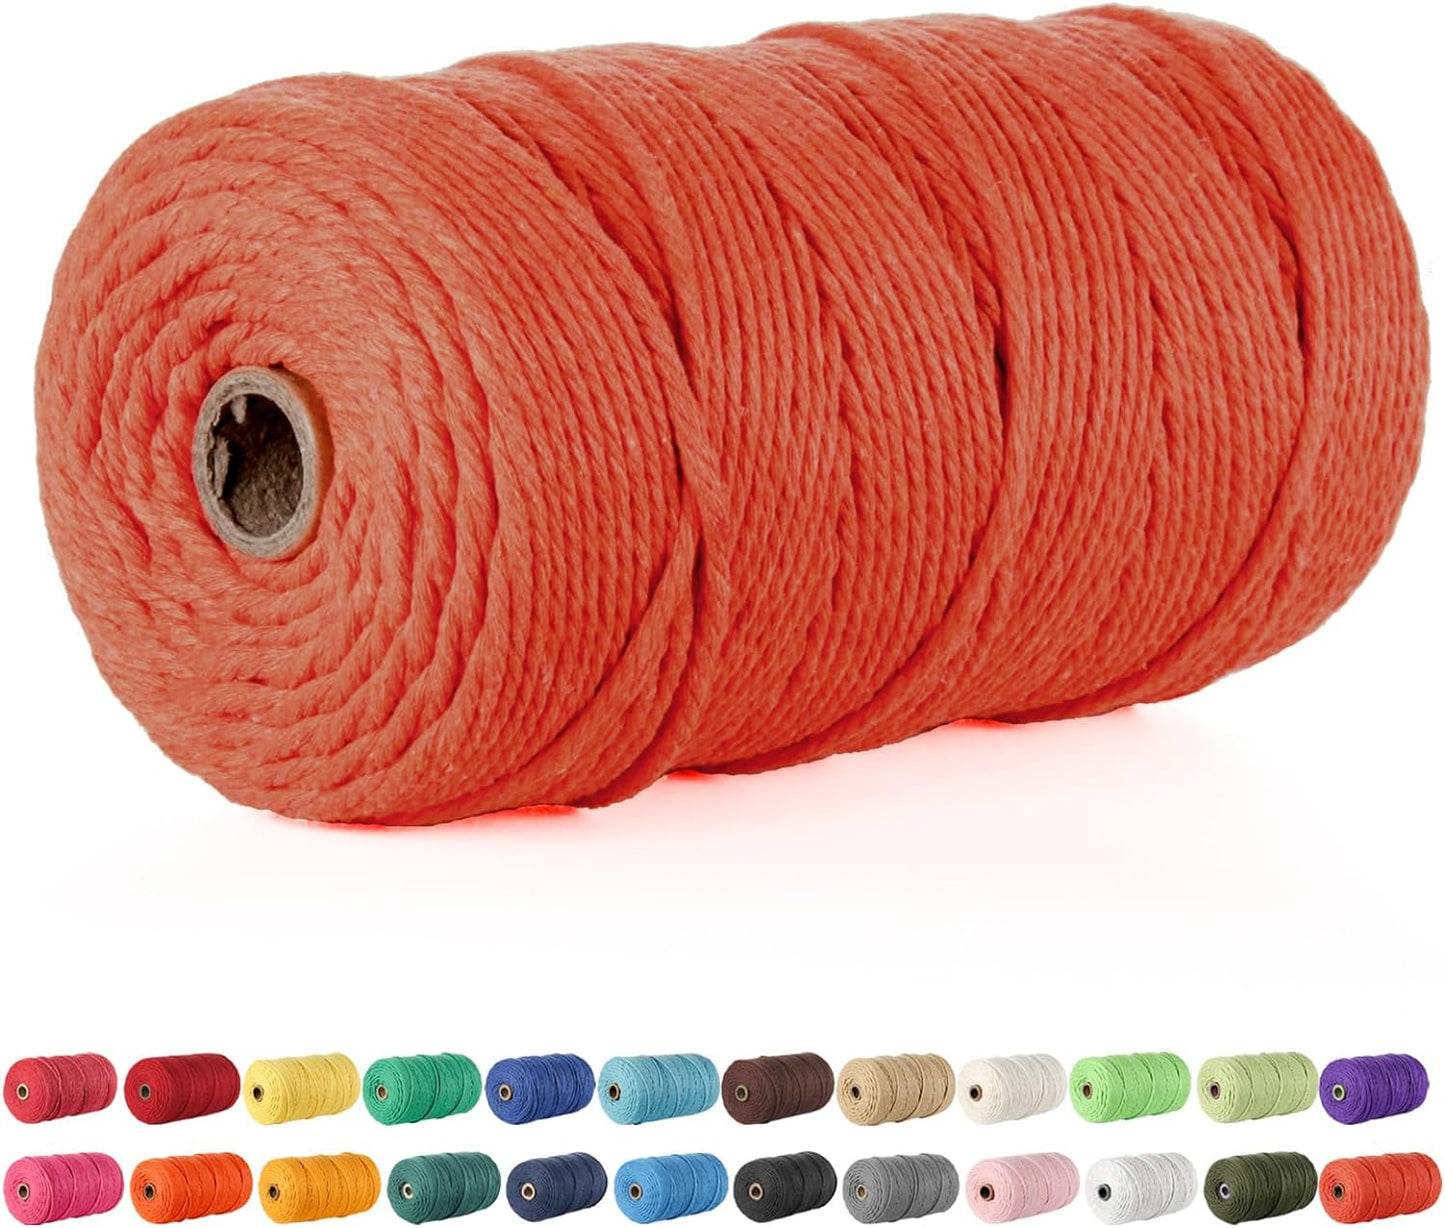 Macrame Cord,  3Mm X 220 Yards (About 200M) Cotton Rope,100% Natural Cotton Macrame Rope for Wall Hanging, Plant Hangers, DIY Crafts Knitting, Christmas Wedding Decorative Projects (Rose Red)